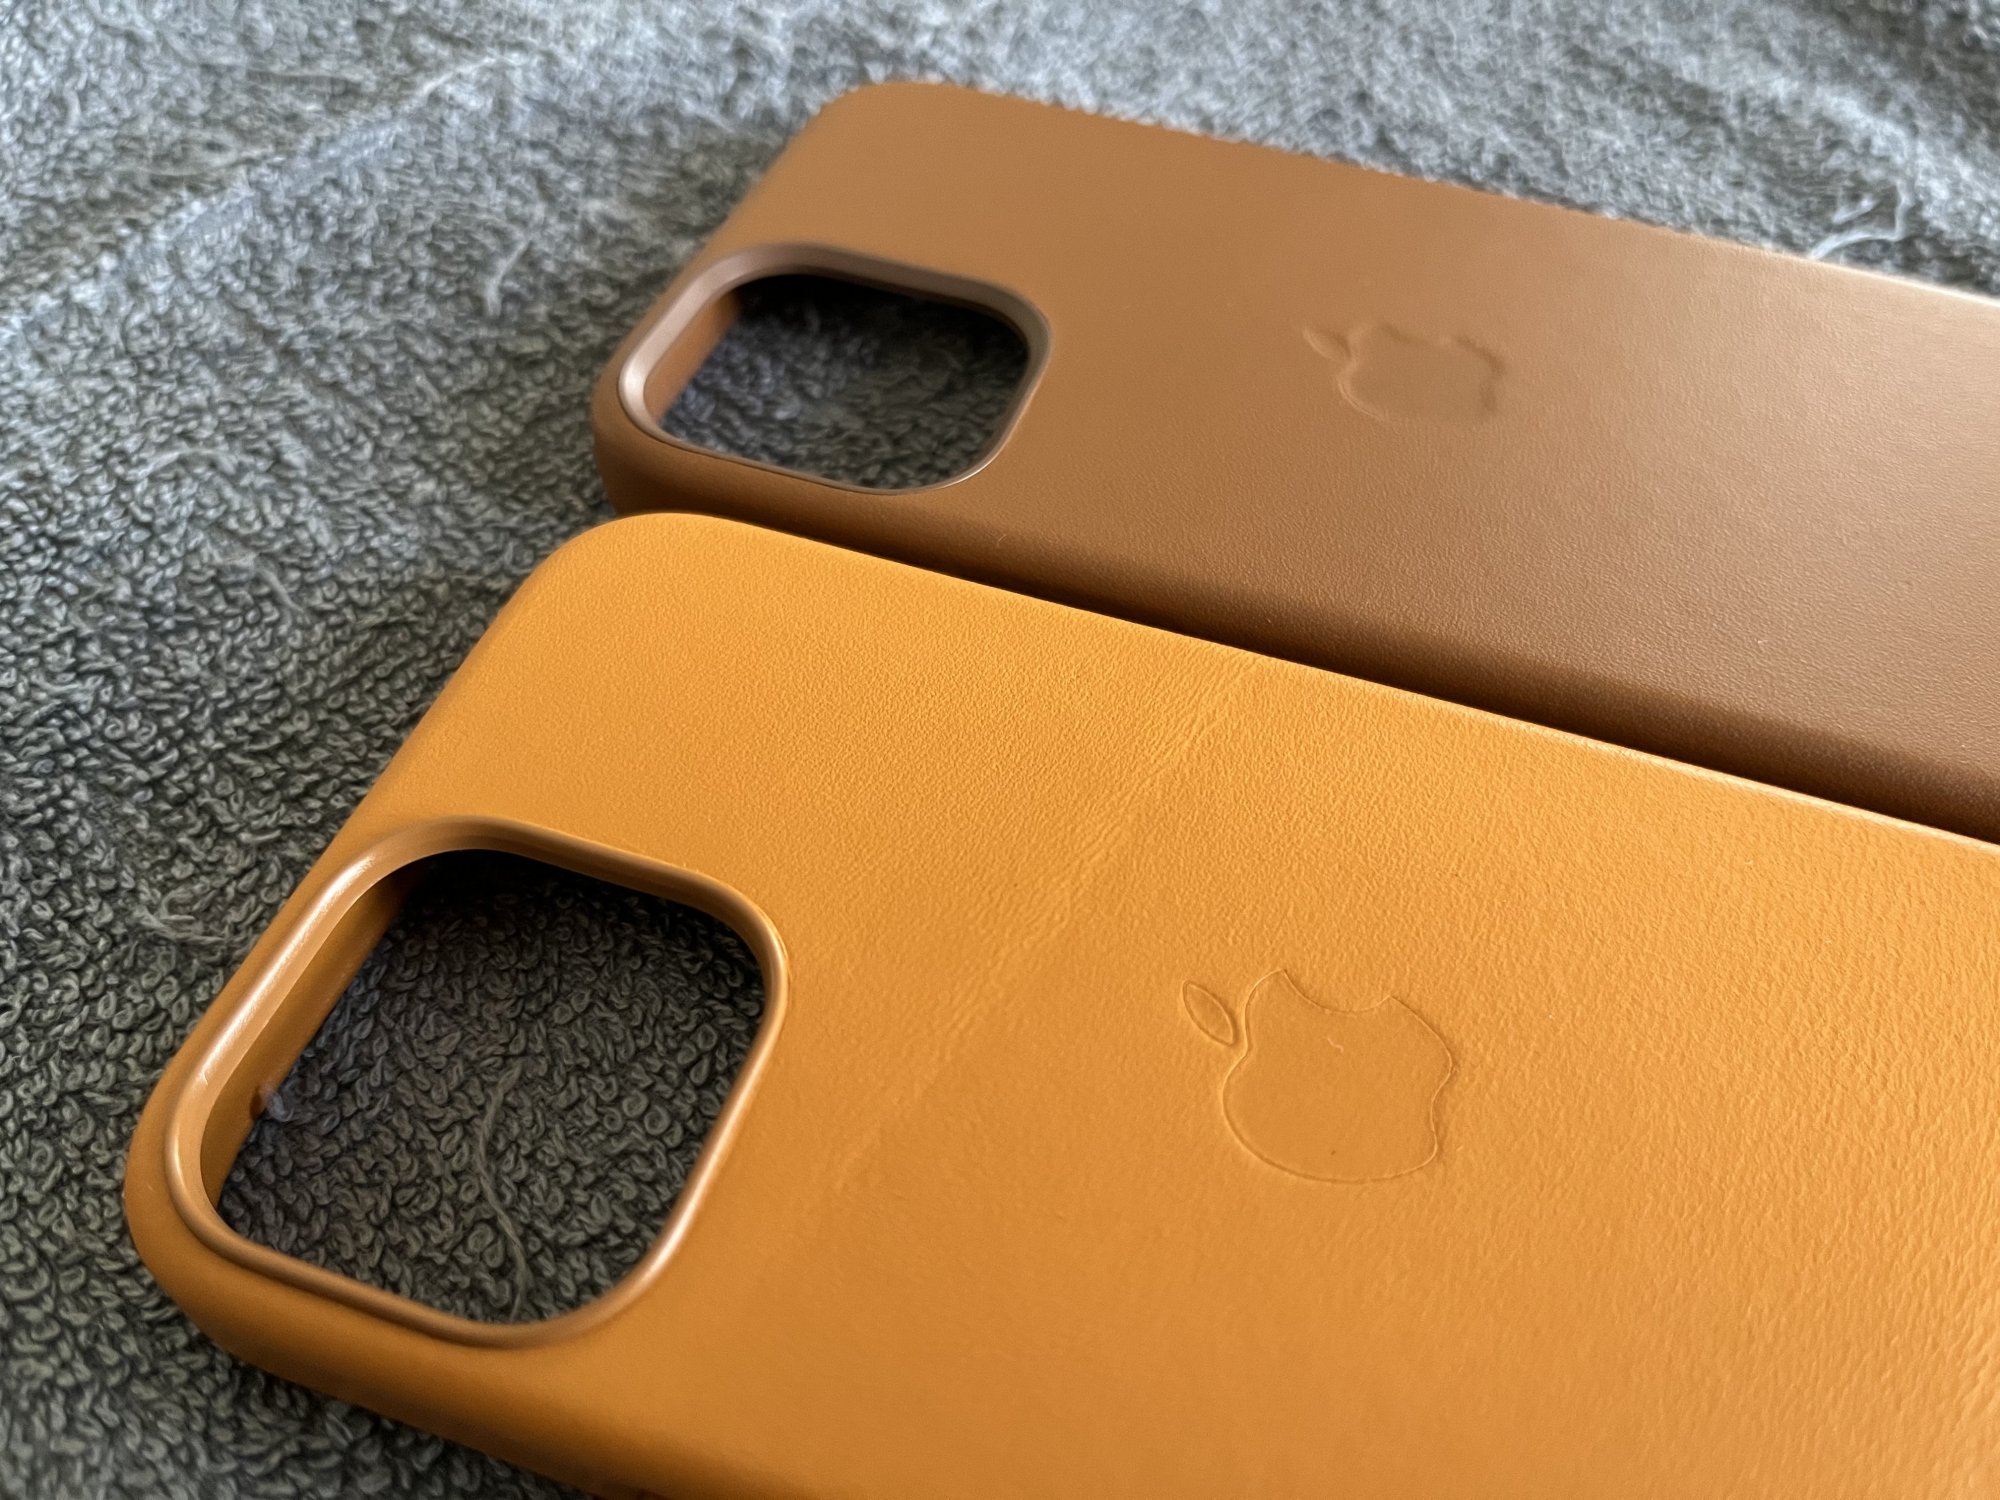 Lines on Apple leather case?